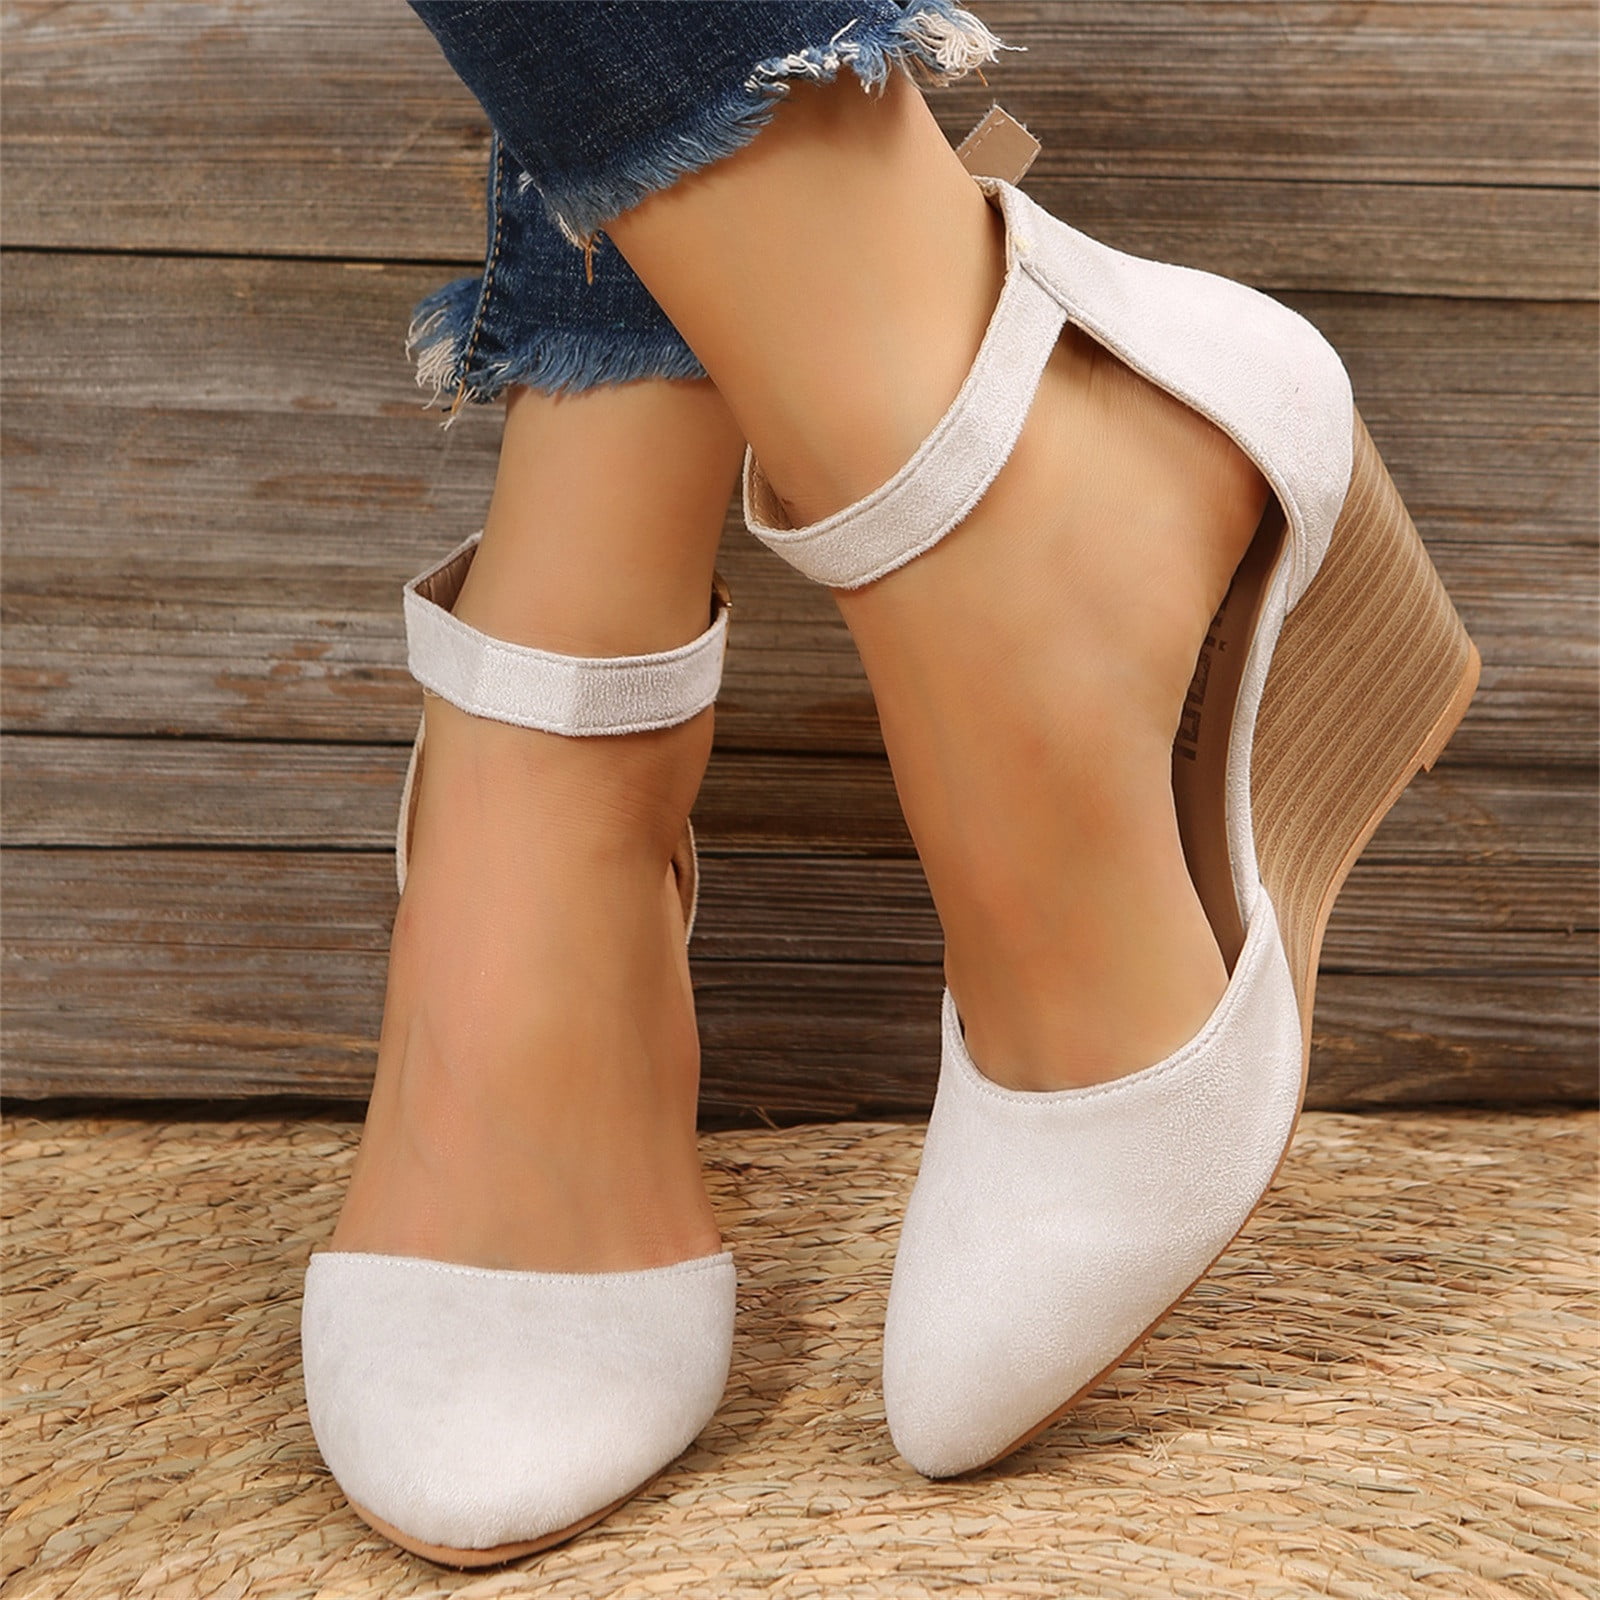 Crystal Queen White Platform Wedges Pumps Women High Heels Shoes Round Toe  Cross Ankle-Strap Large S | Shopee Philippines